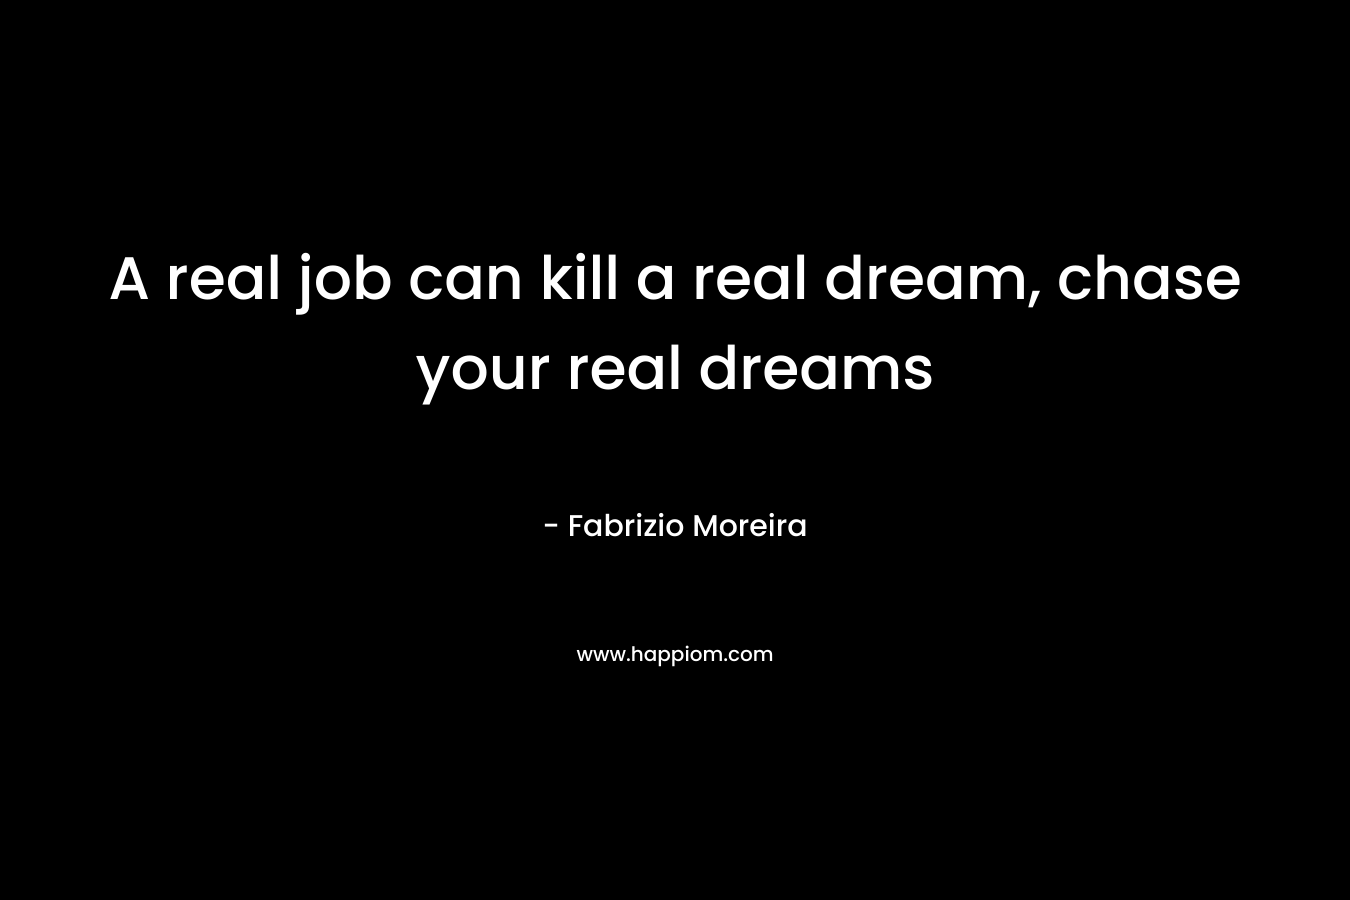 A real job can kill a real dream, chase your real dreams